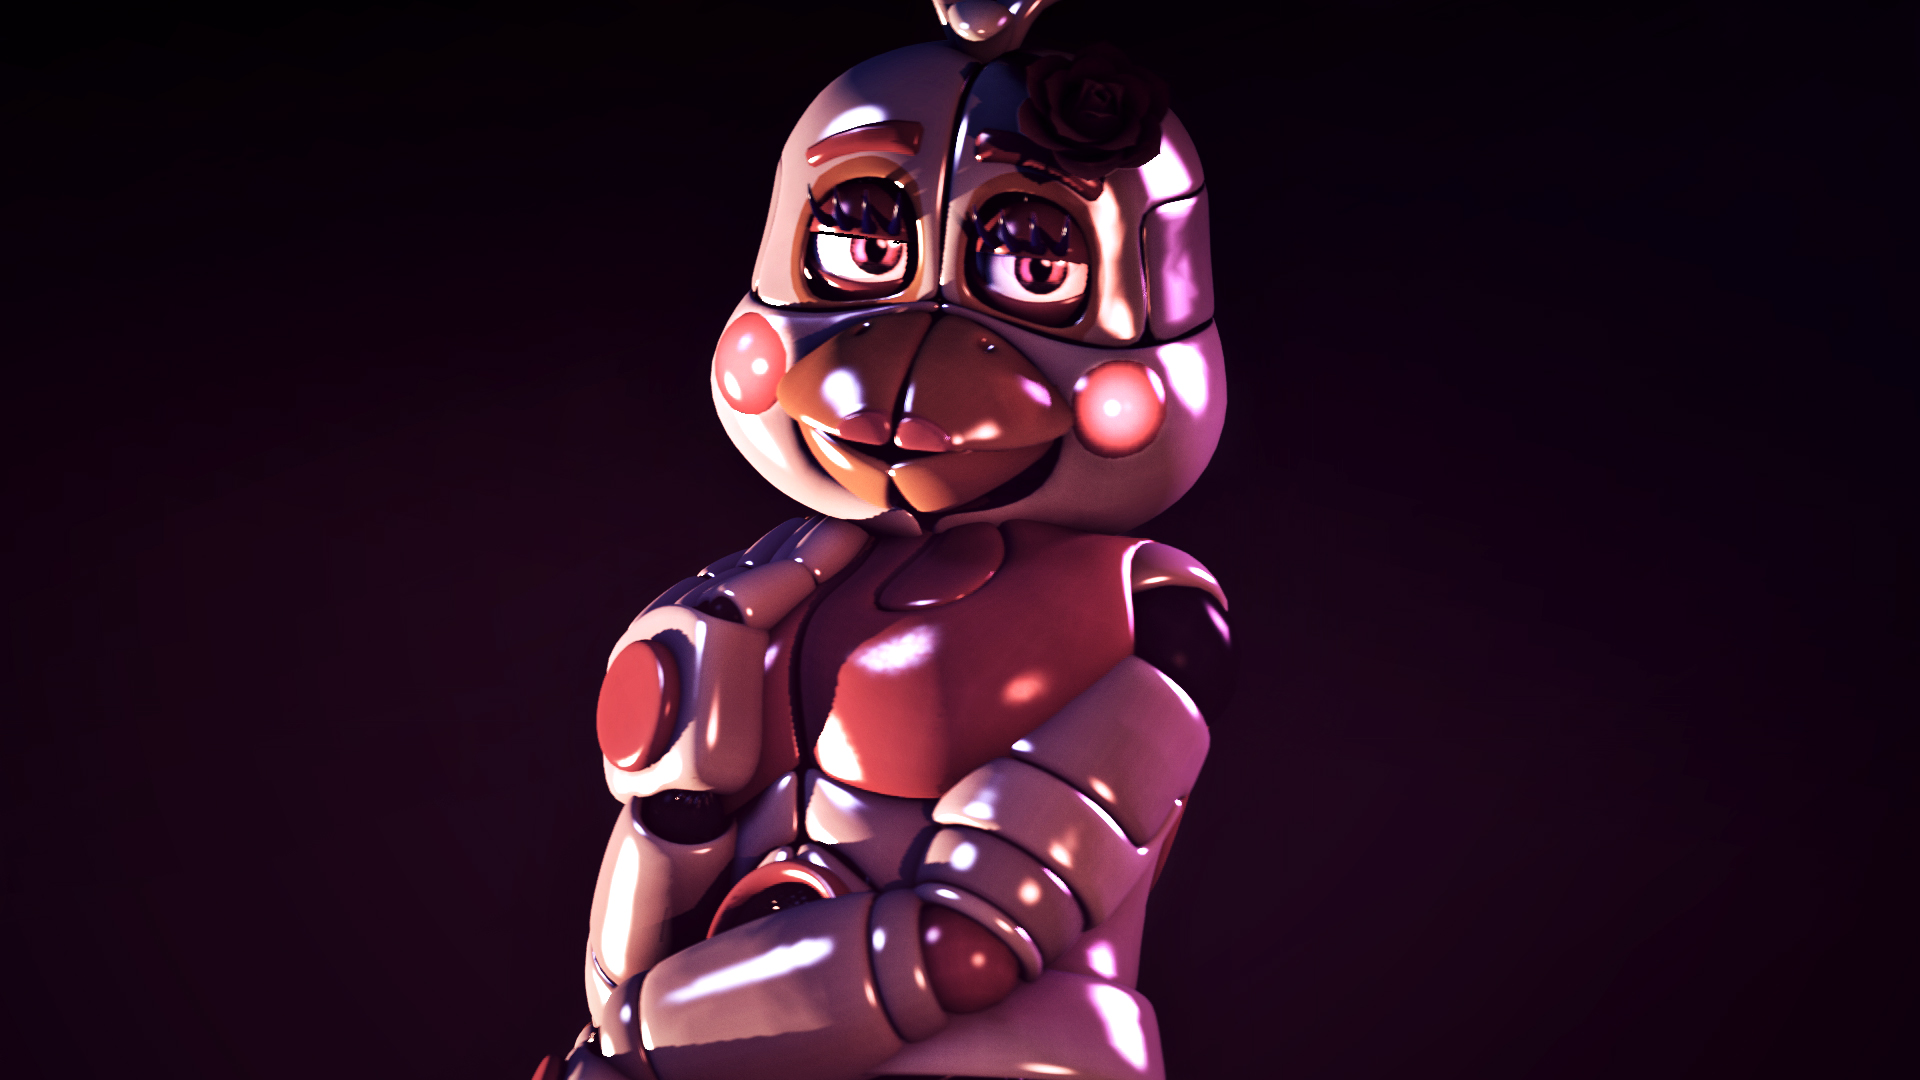 Funtime Chica by KristinaWinter on DeviantArt